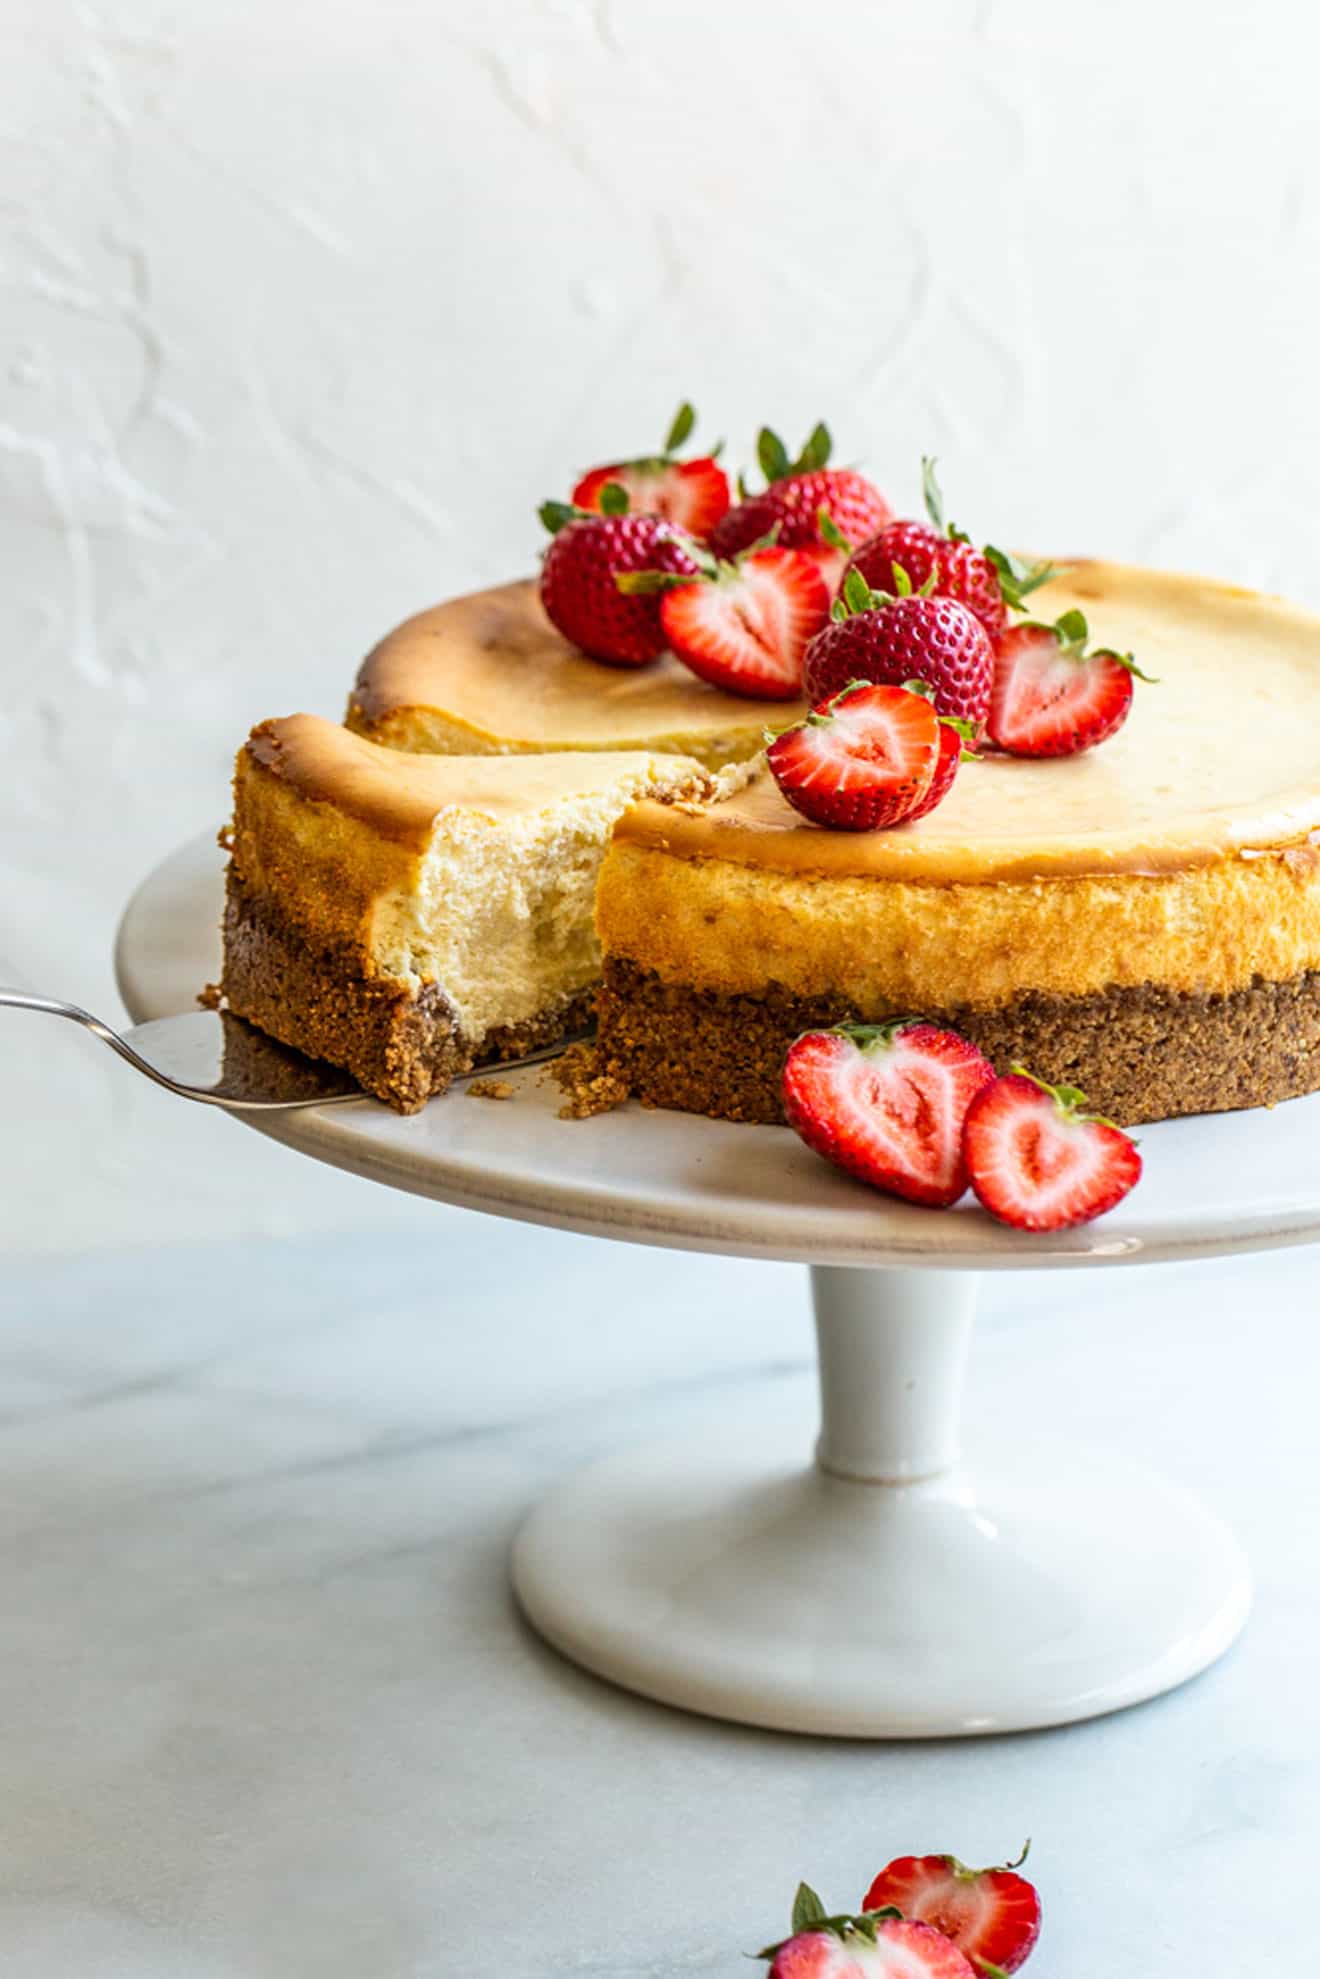 Gluten Free Cheesecake - The Toasted Pine Nut